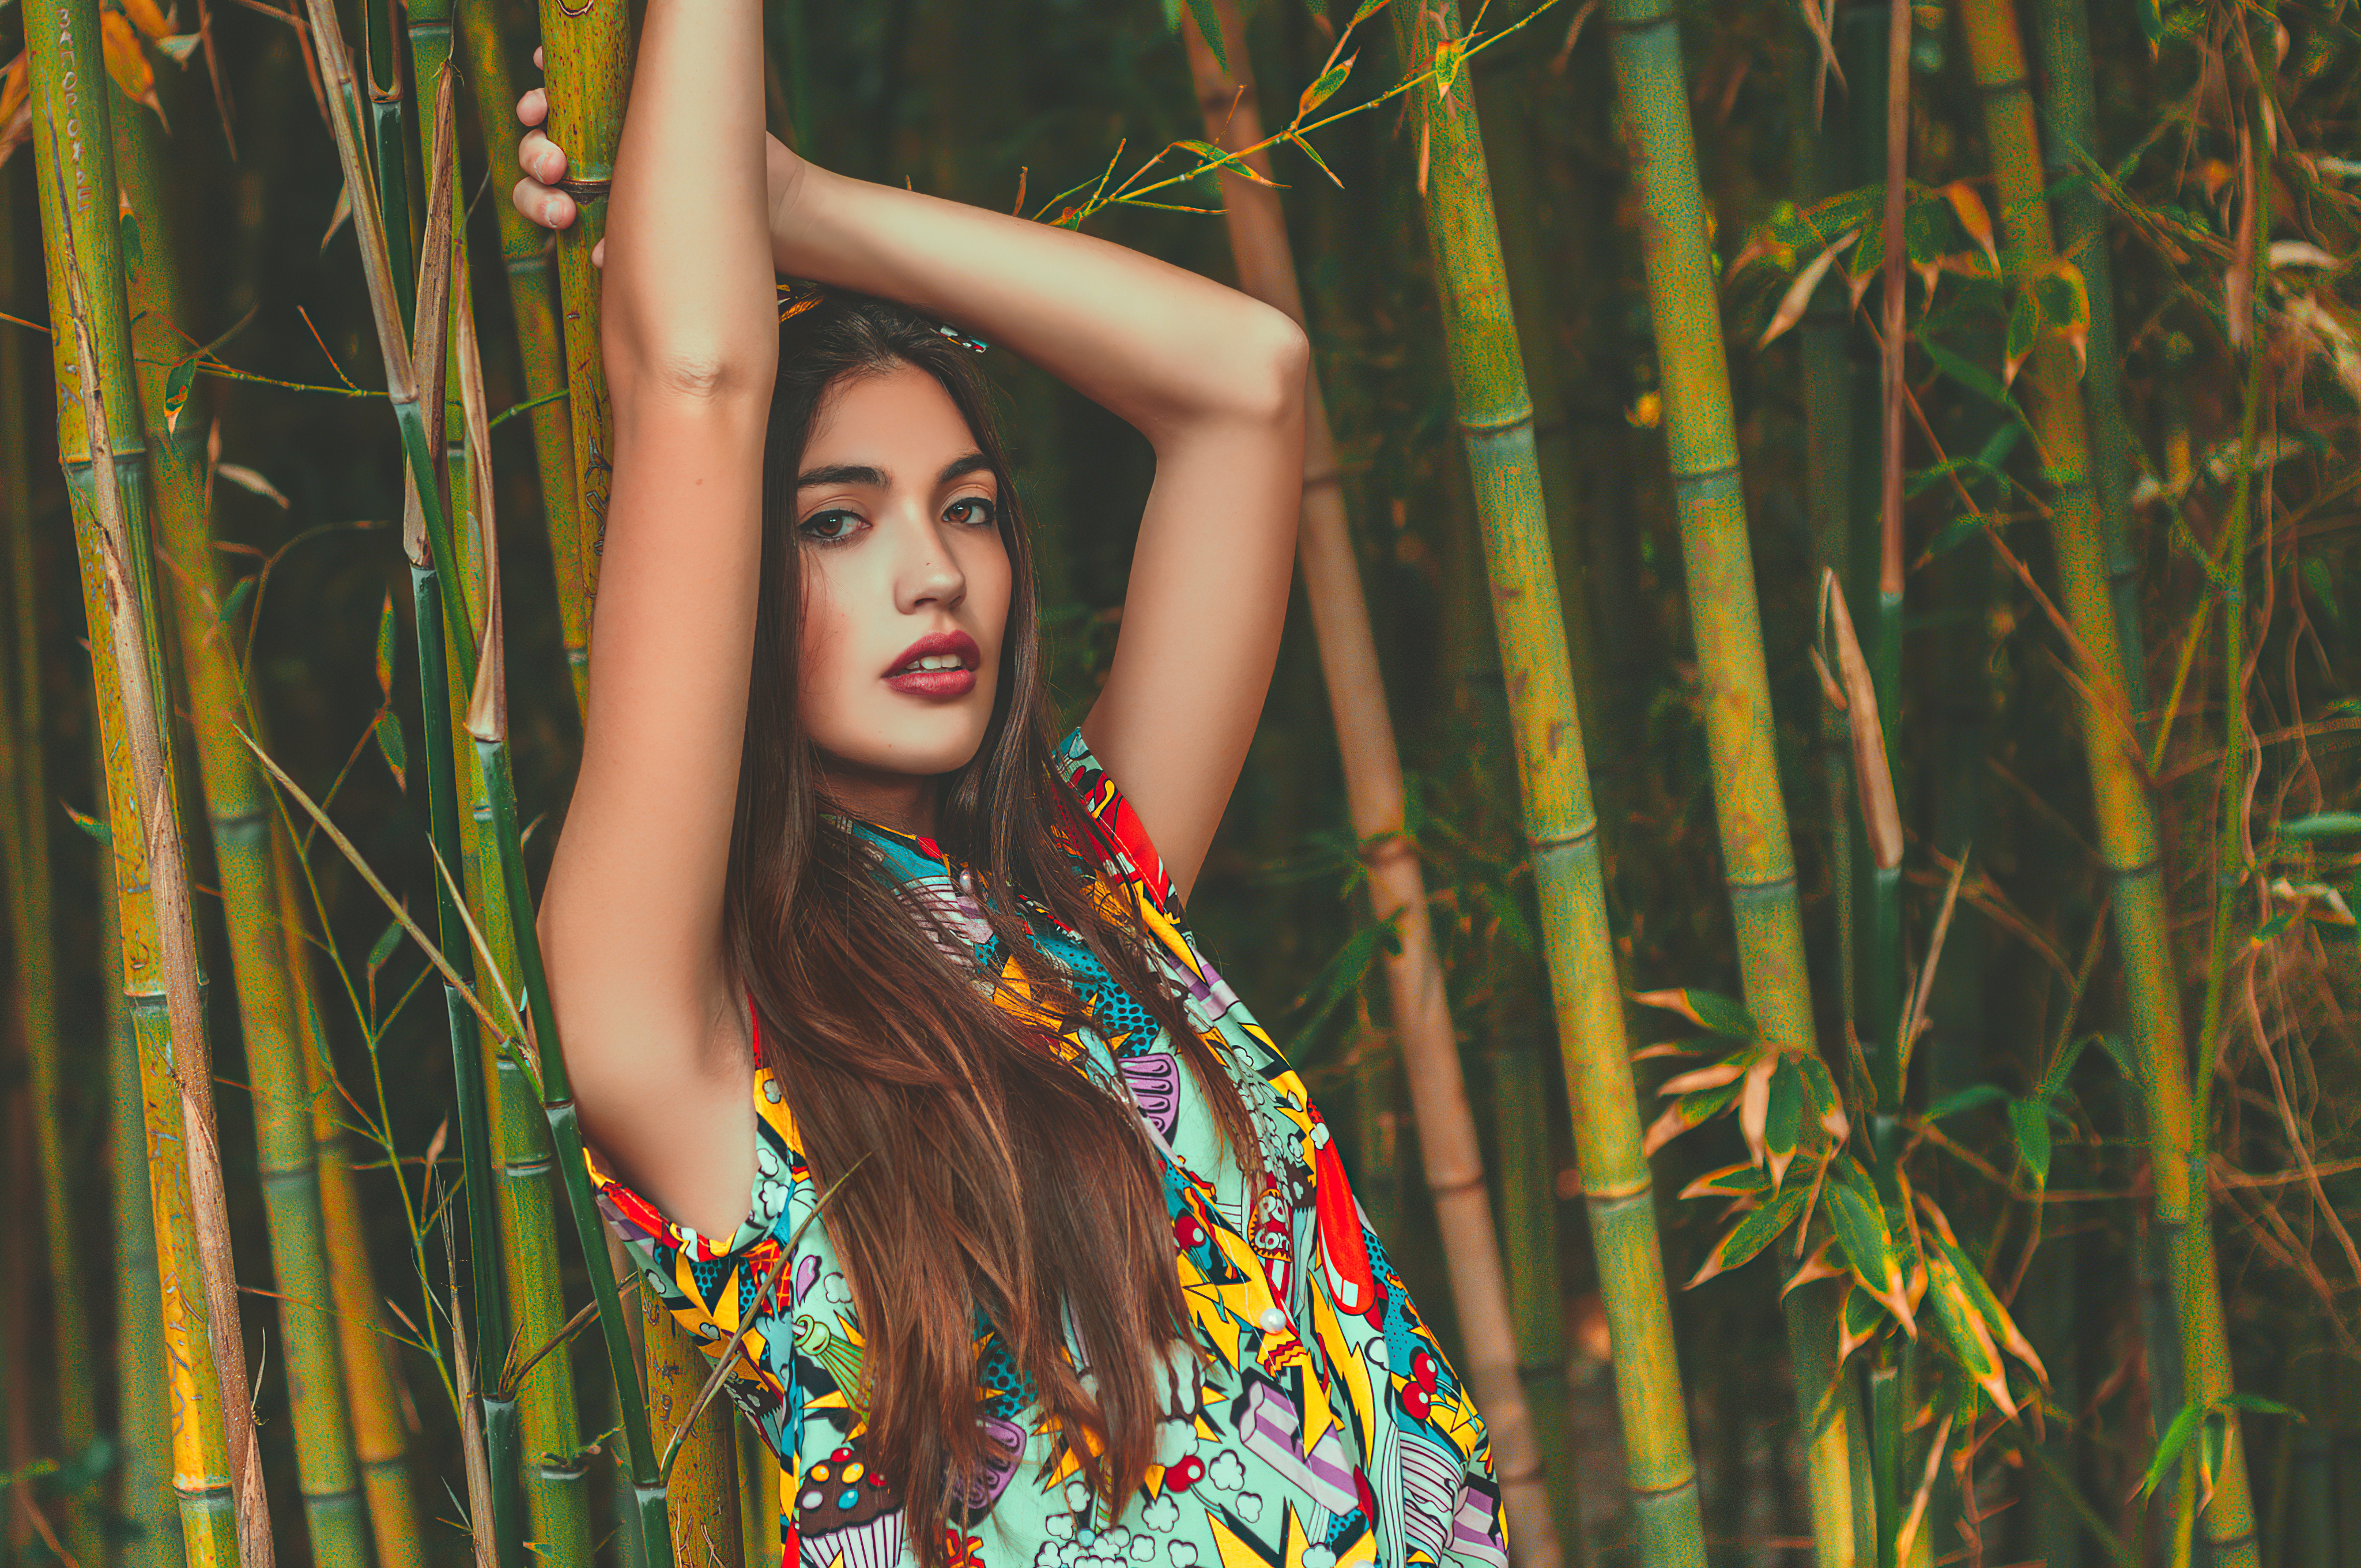 Paula Riba poses in a colorful dress against a background of bamboo